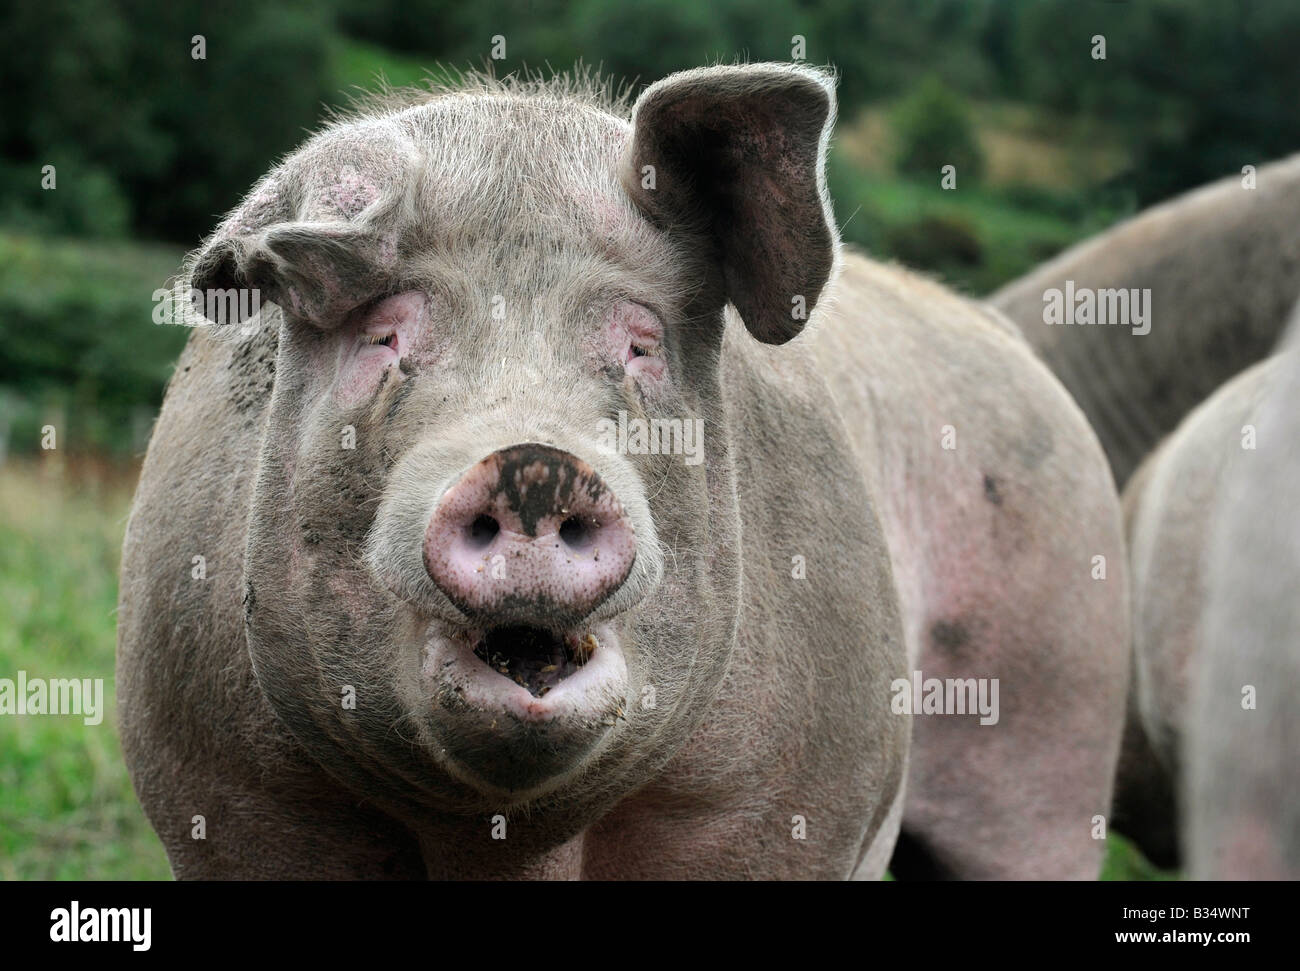 A BRITISH PIG IN FIELD RE FARMS FARMING FARMERS SUBSIDIES DISEASE INCOMES MEAT BACON GAMMON PORK FACE CLOSE UP ,UK,ENGLAND. Stock Photo